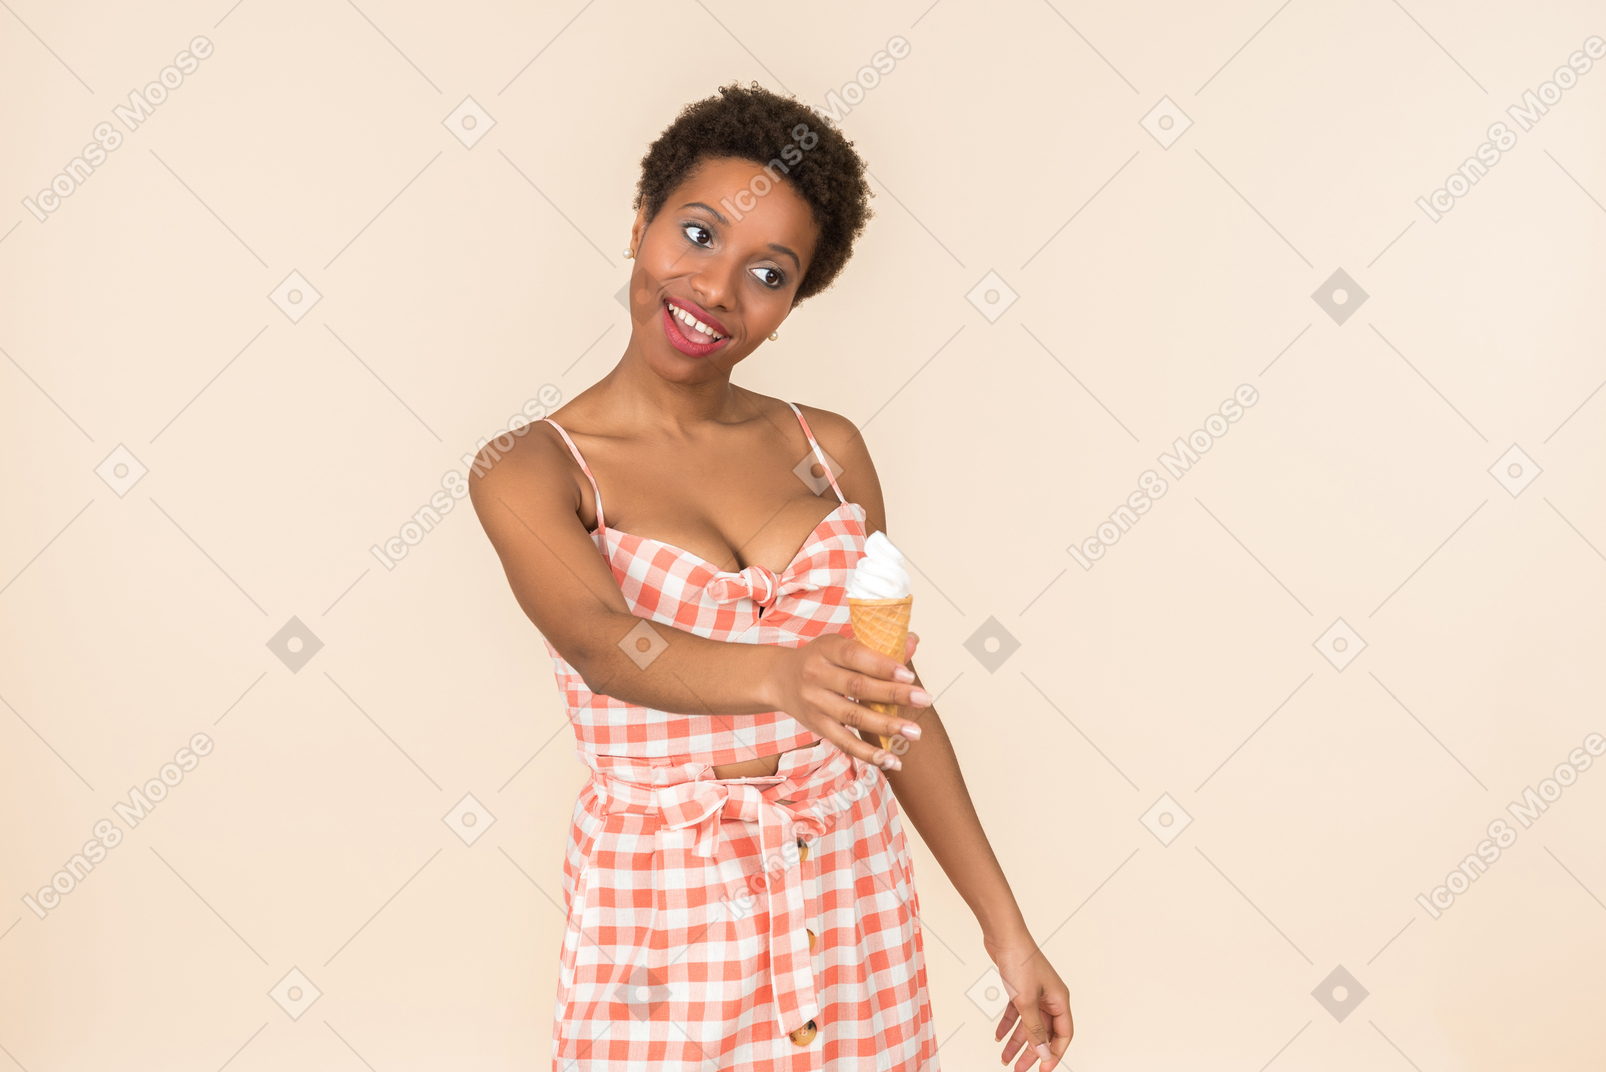 Young black short-haired woman in a checkered top and a skirt, posing with an ice cream cone